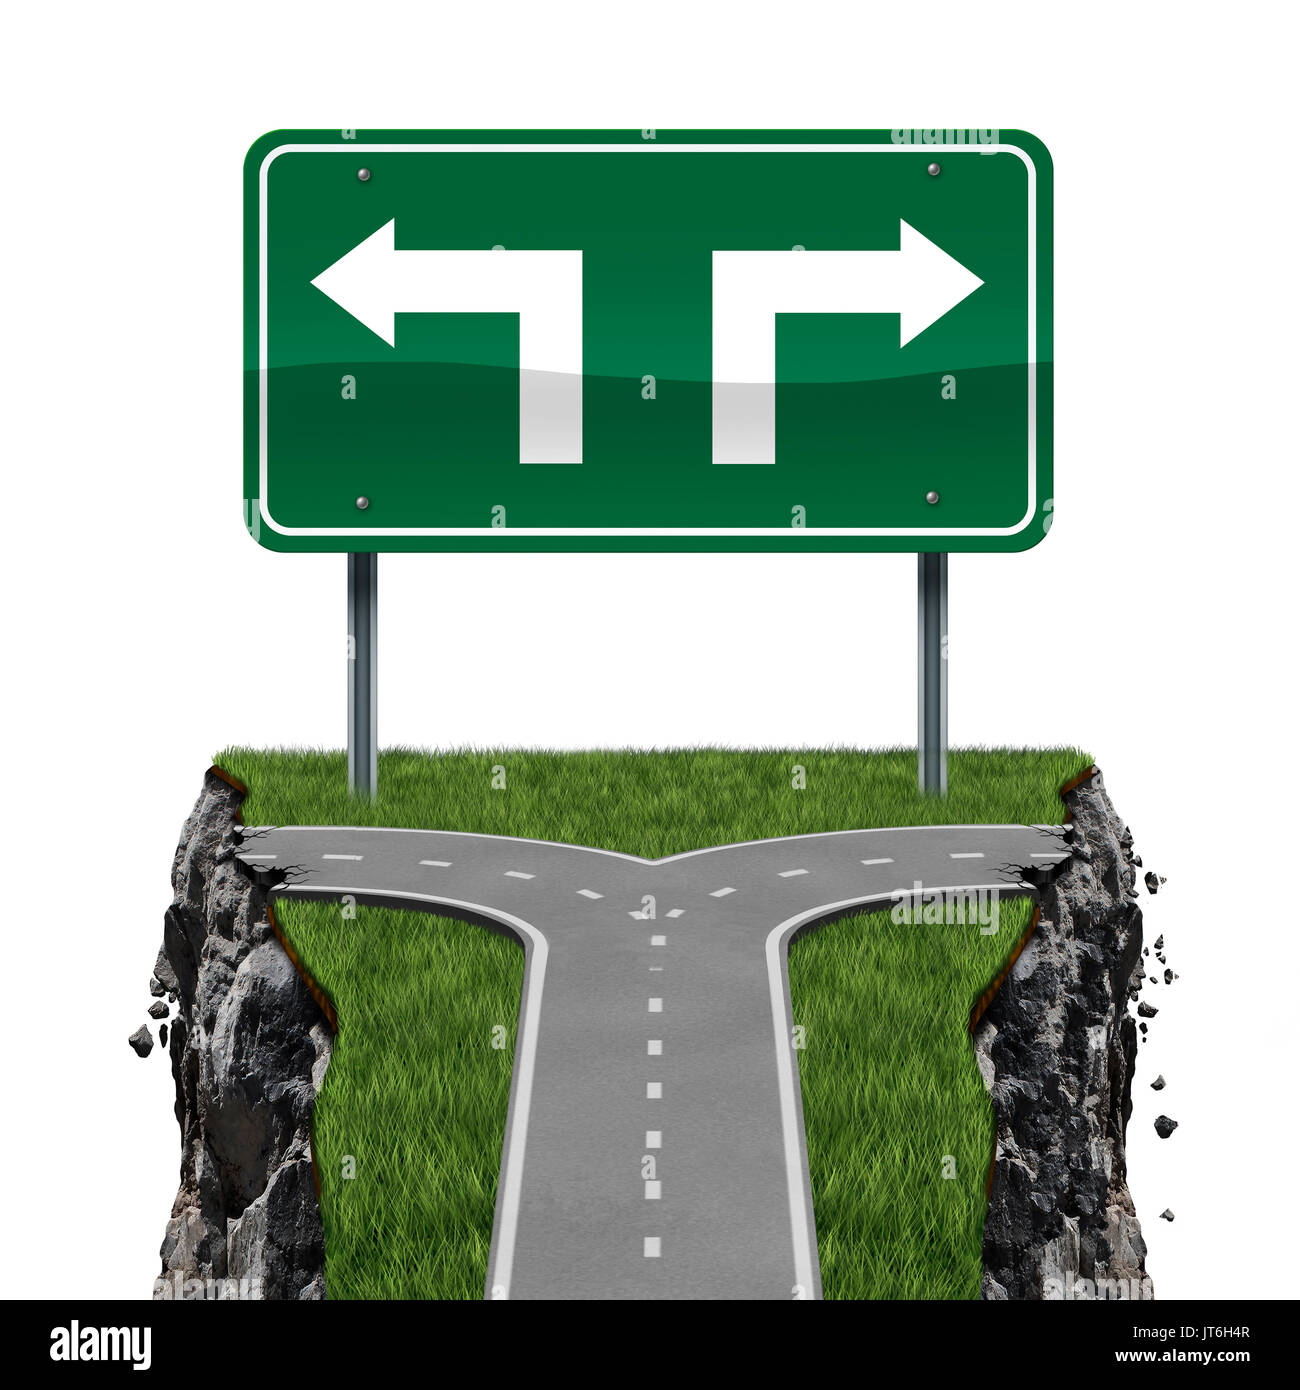 Impossible options business concept and reaching a dead end as a cross road or crossroad leading to a lack of opportunity. Stock Photo